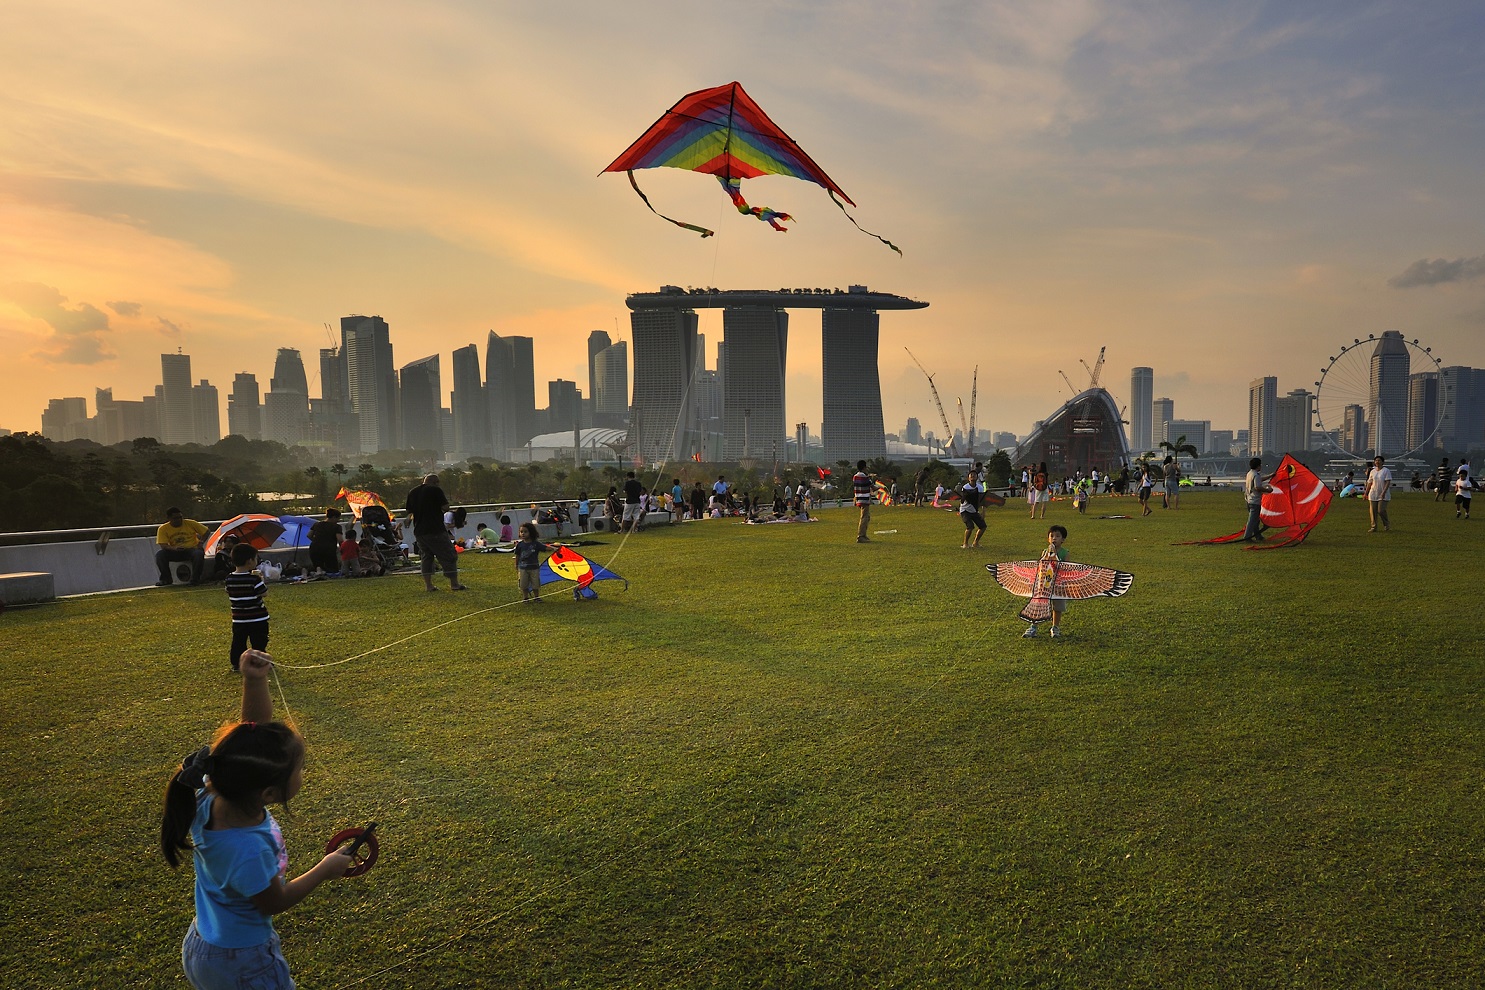 Children with their families flying kites at Marina Barrage with the Singapore skyline in the background